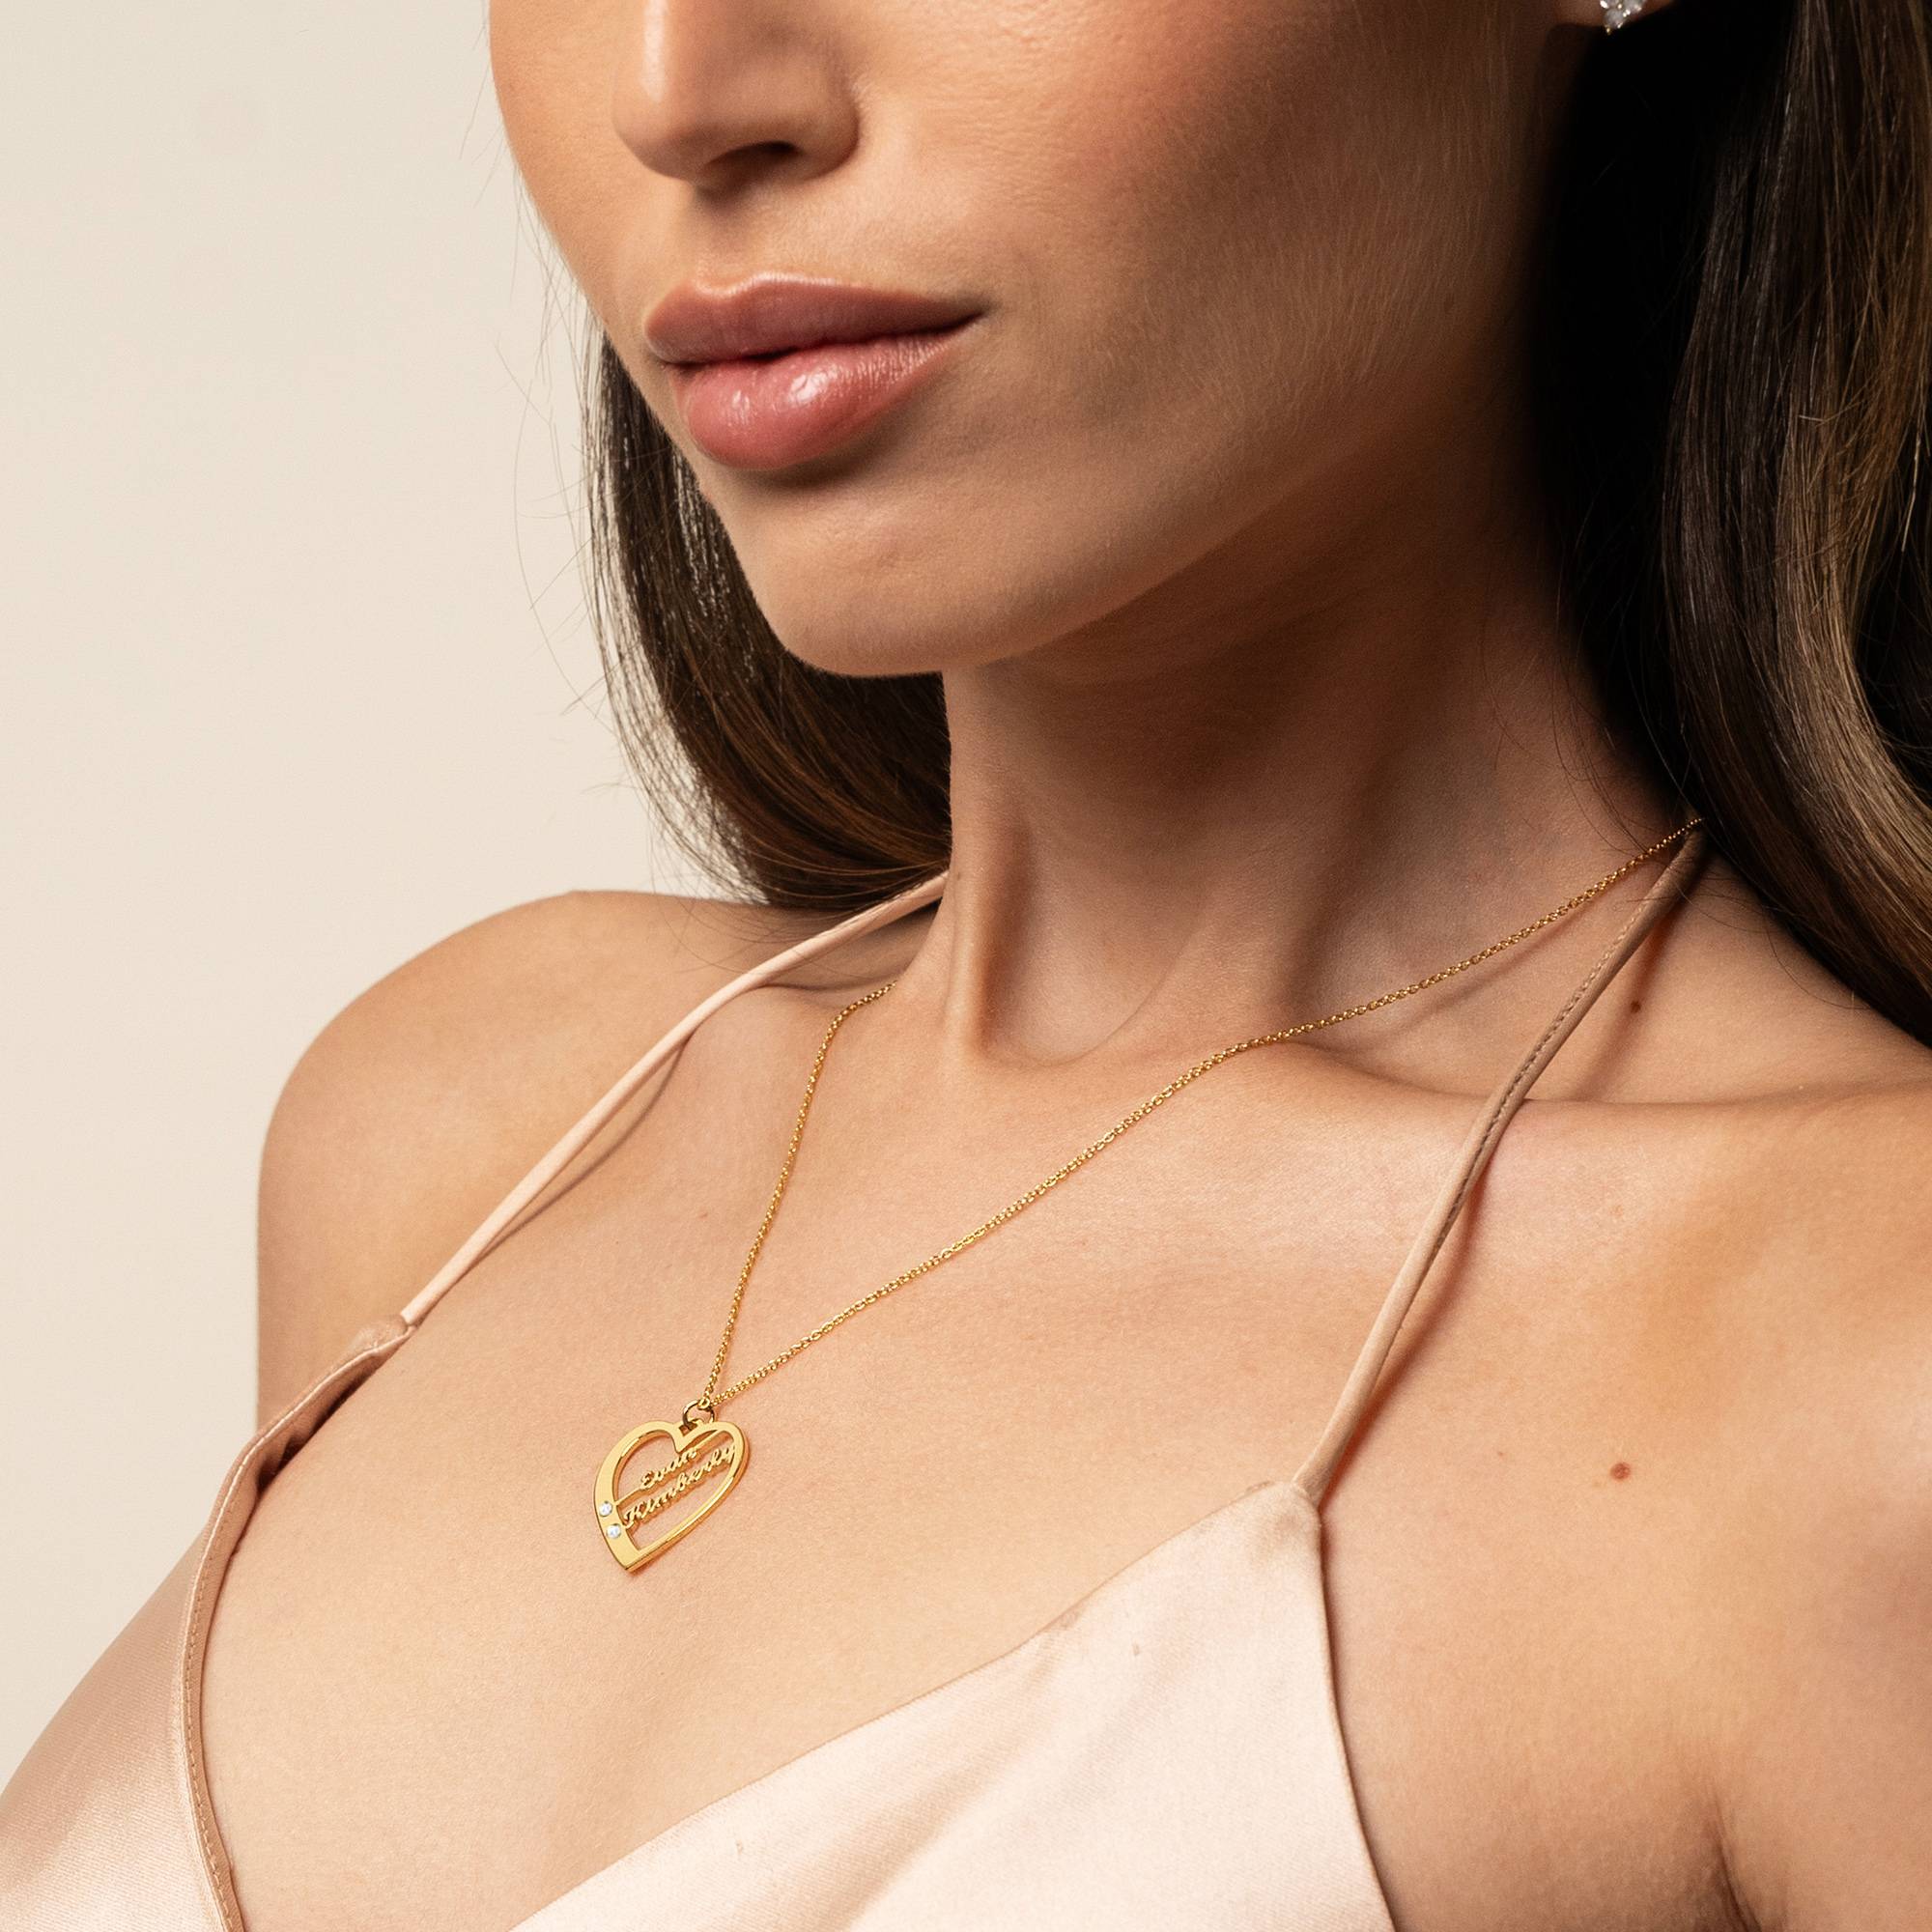 Ella Diamond Heart Necklace with Names in 18K Gold Plating-2 product photo